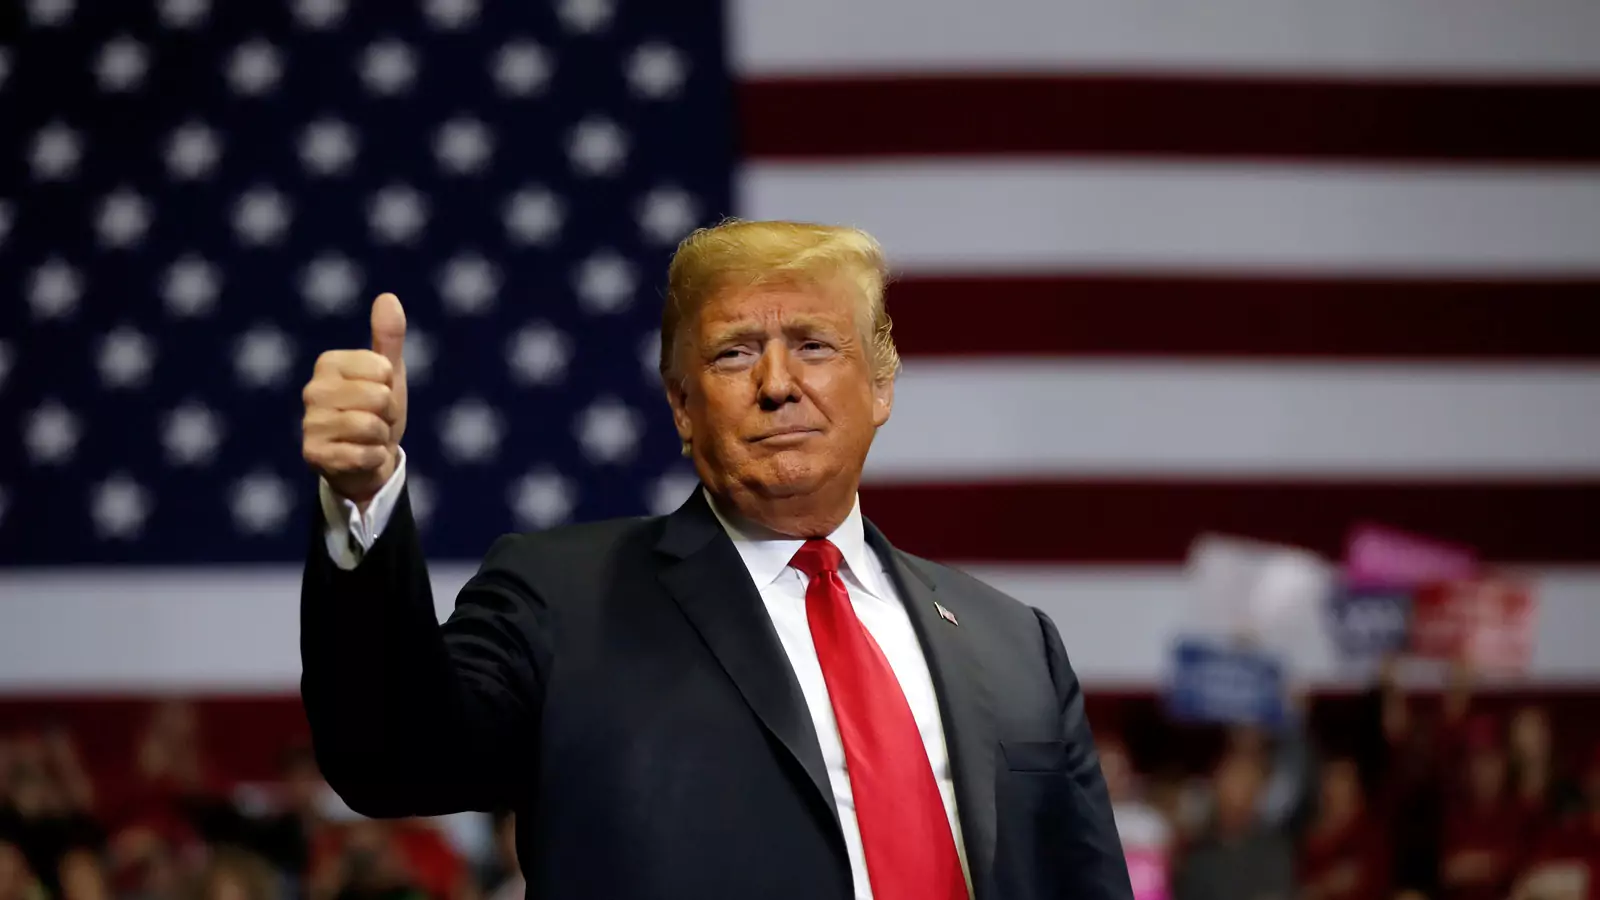 U.S. President Donald Trump gestures to supporters during a campaign rally at the Allen County War Memorial Coliseum in Fort Wayne, Indiana, U.S., November 5, 2018.